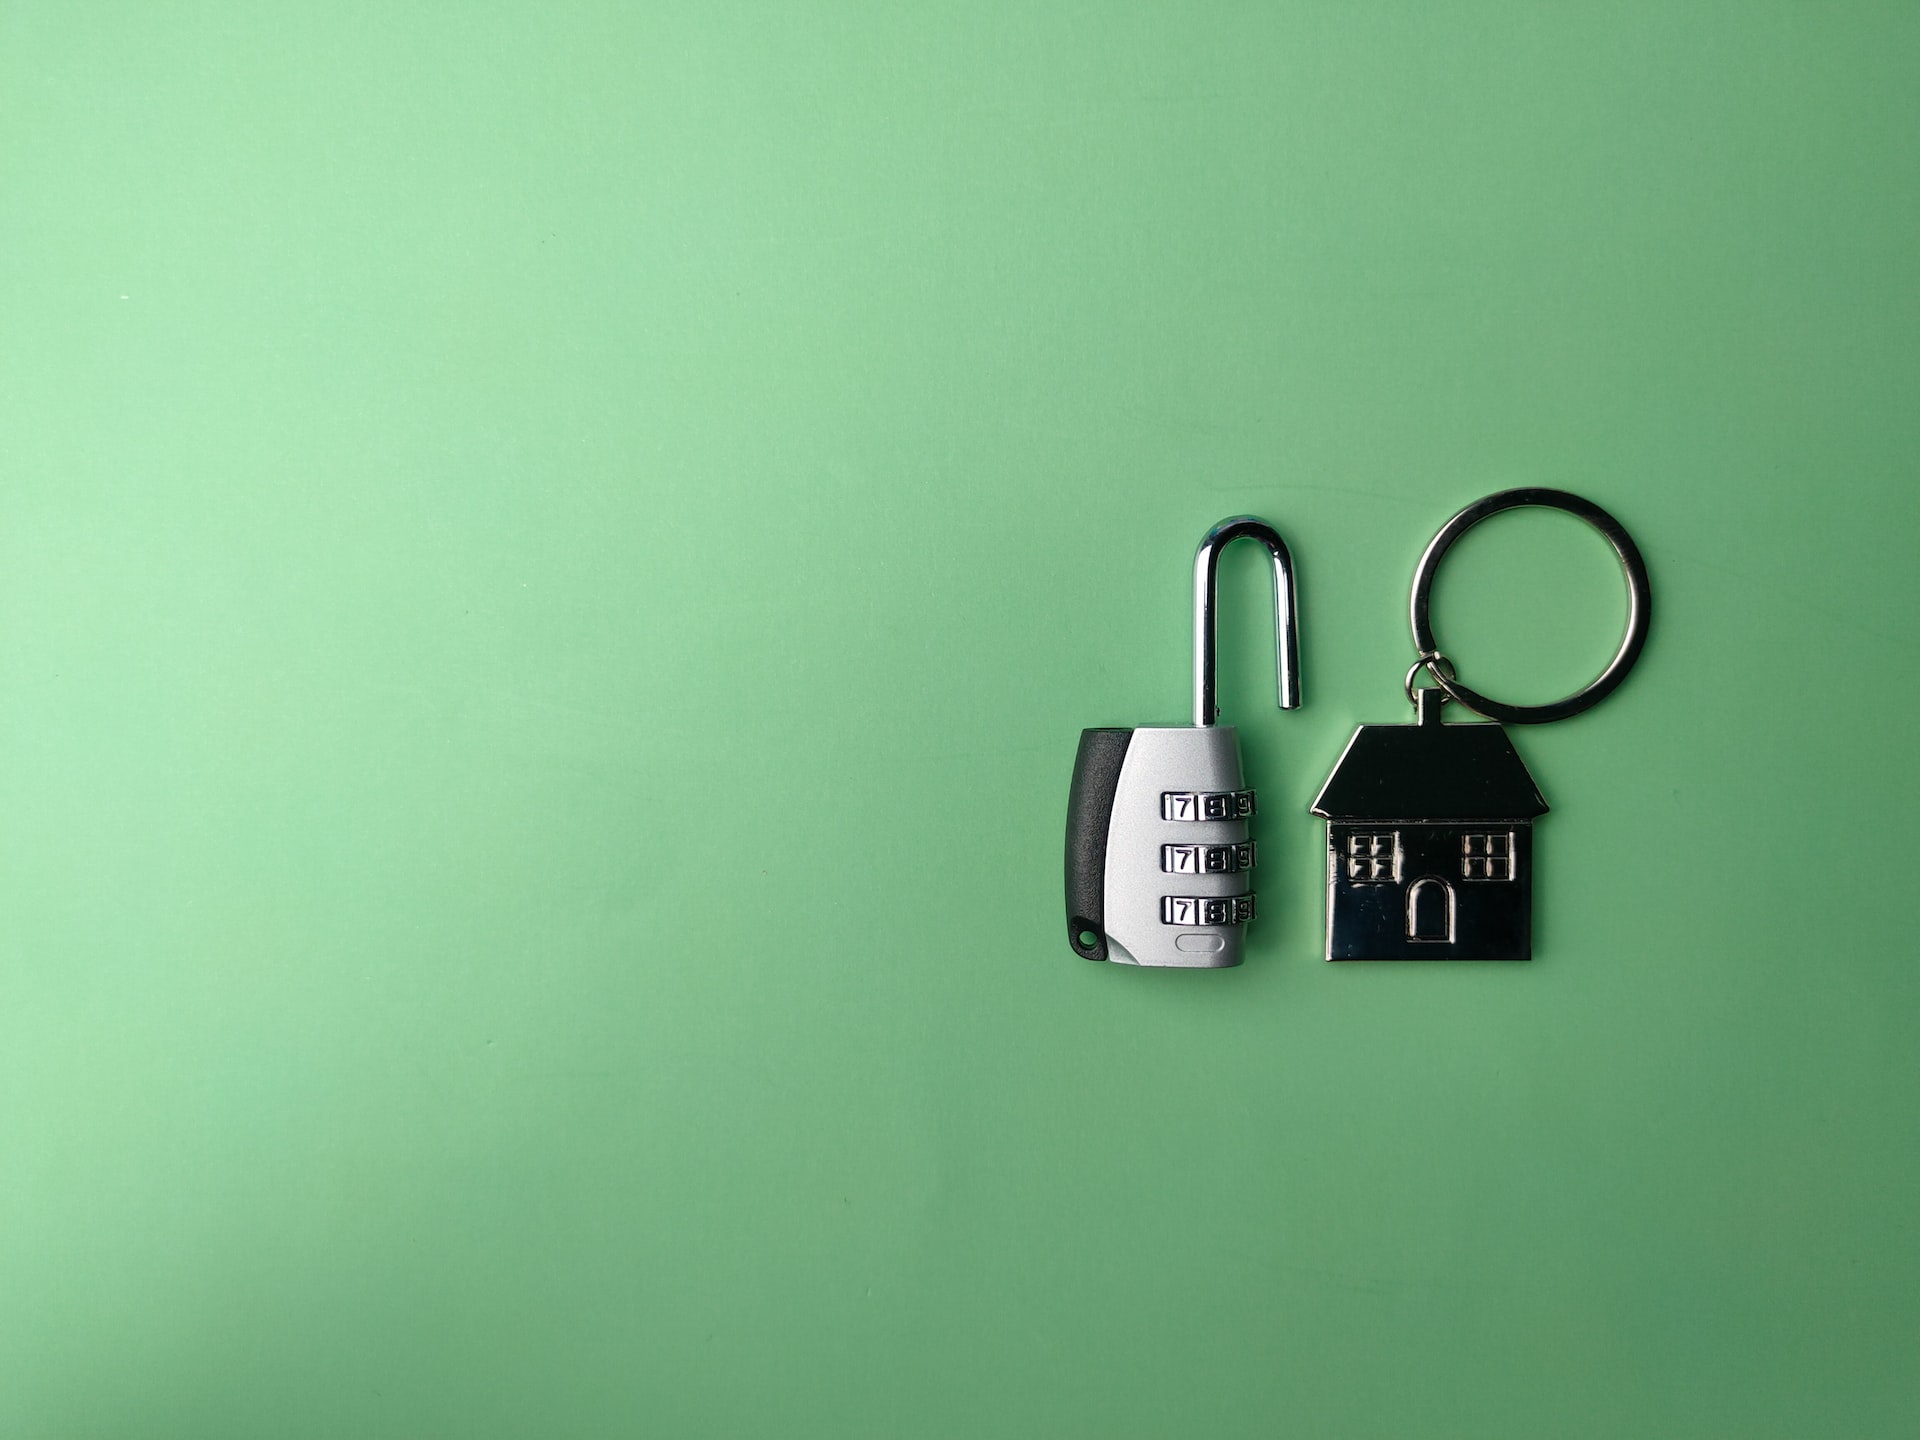 A lock and key fob in the shape of a house